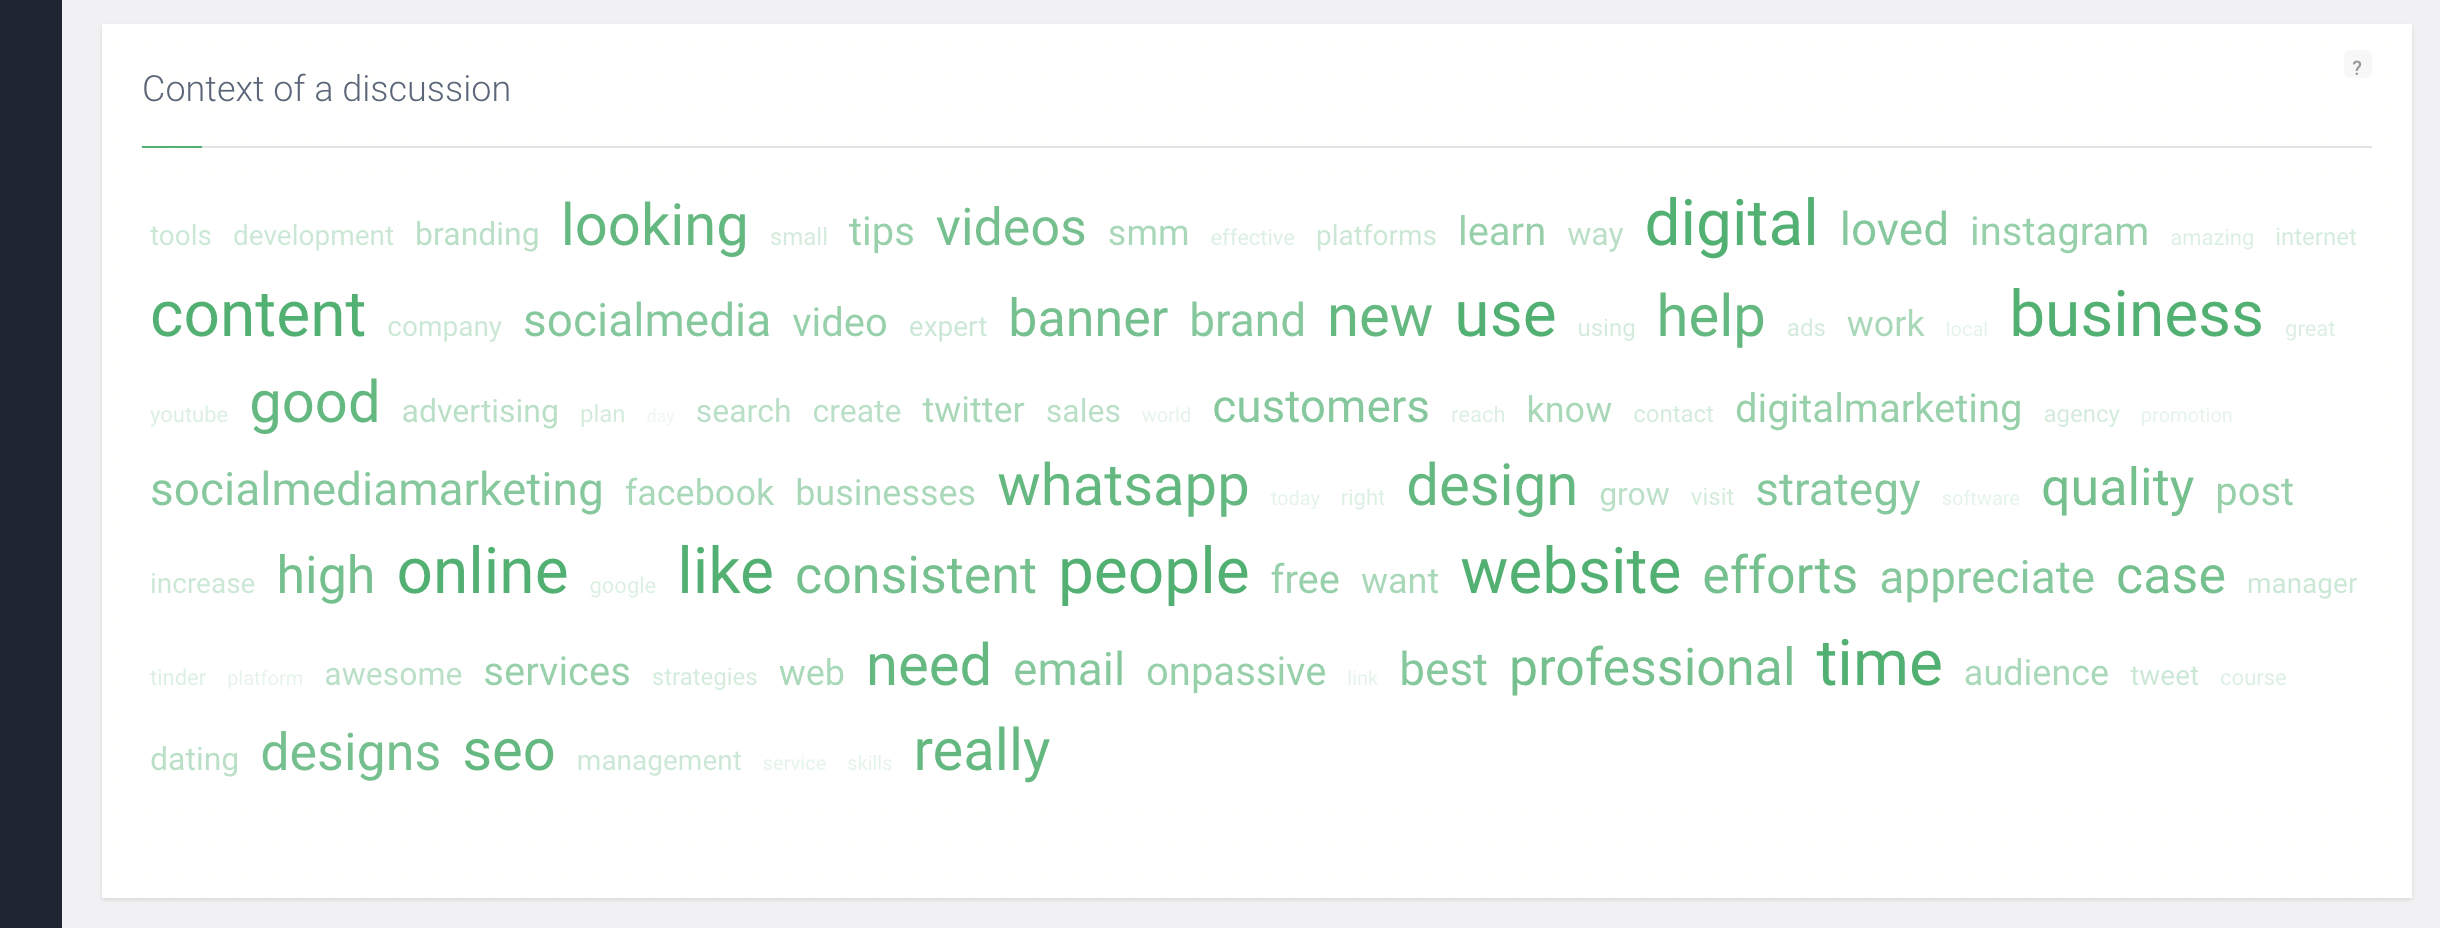 Brand24 Software - The context of the discussion section is excellent not only to get into discussions surrounding the brand but also as a place you can find popular hashtags.